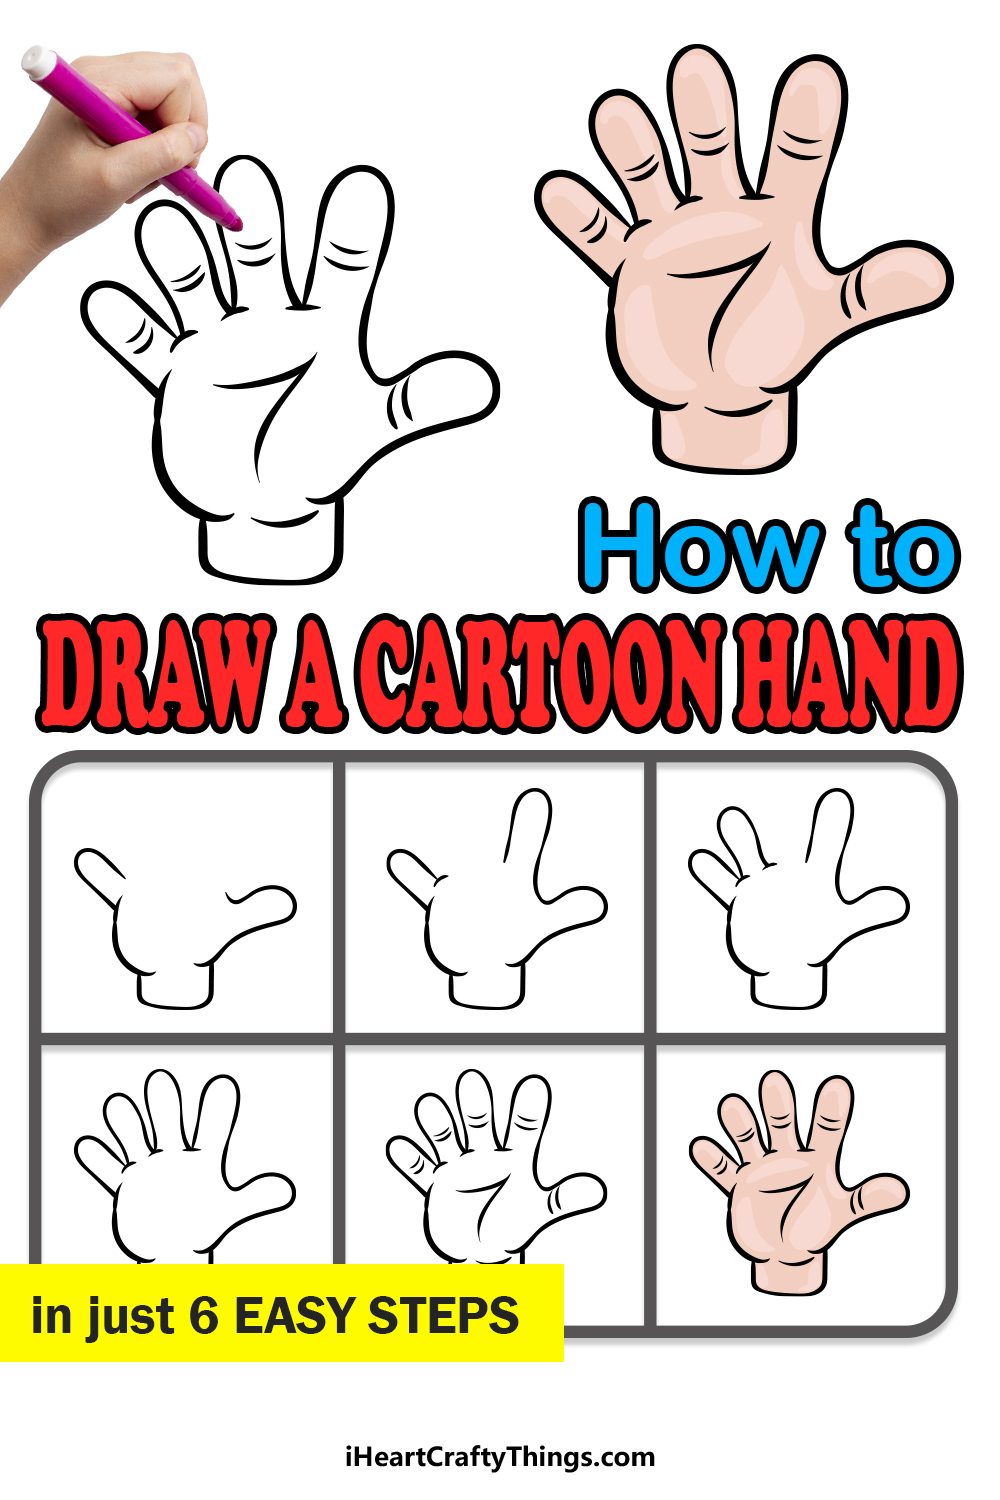 how to draw a cartoon hand in 6 easy steps